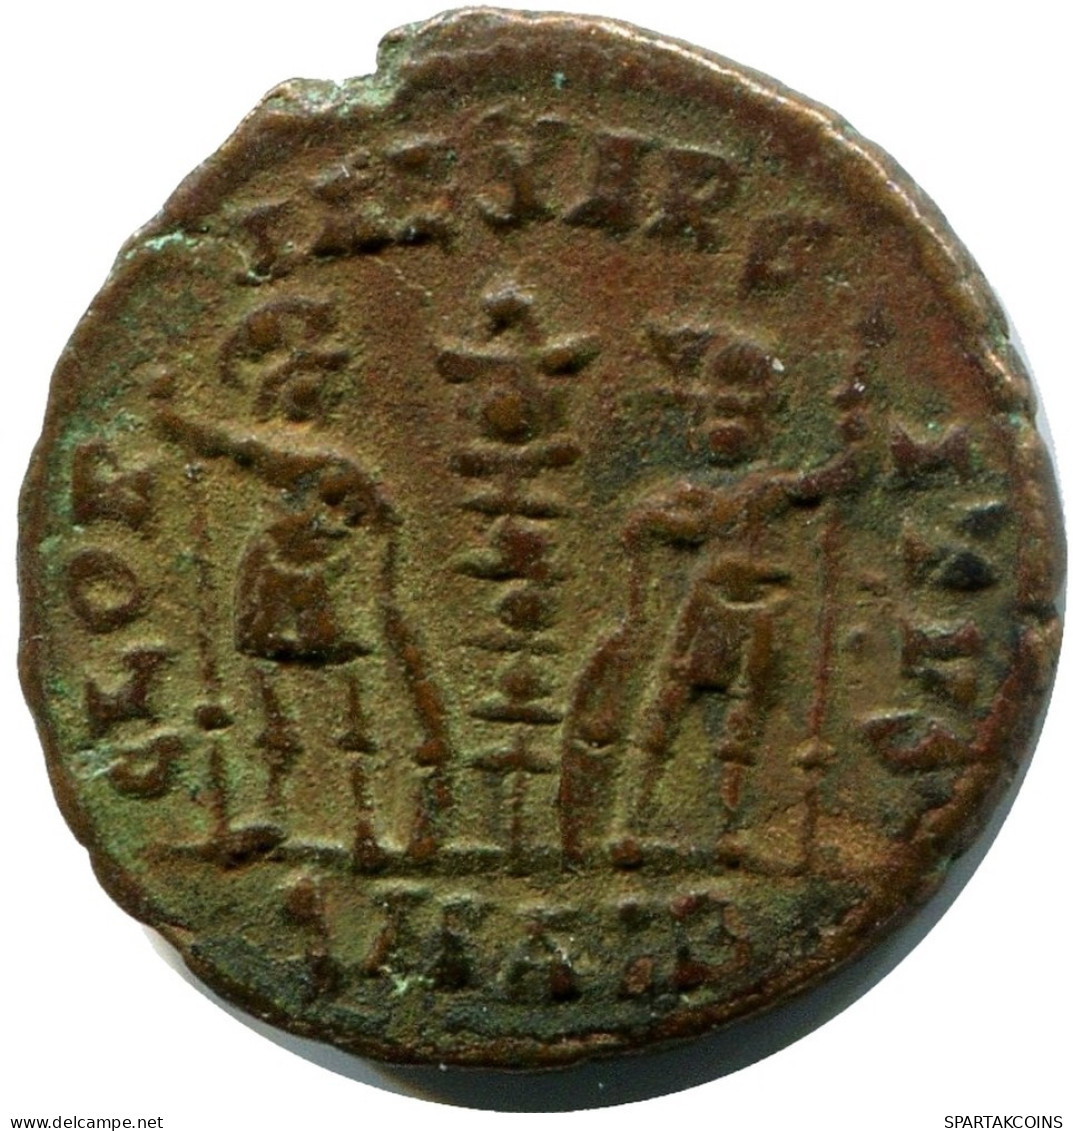 CONSTANS MINTED IN ALEKSANDRIA FROM THE ROYAL ONTARIO MUSEUM #ANC11394.14.D.A - Der Christlischen Kaiser (307 / 363)